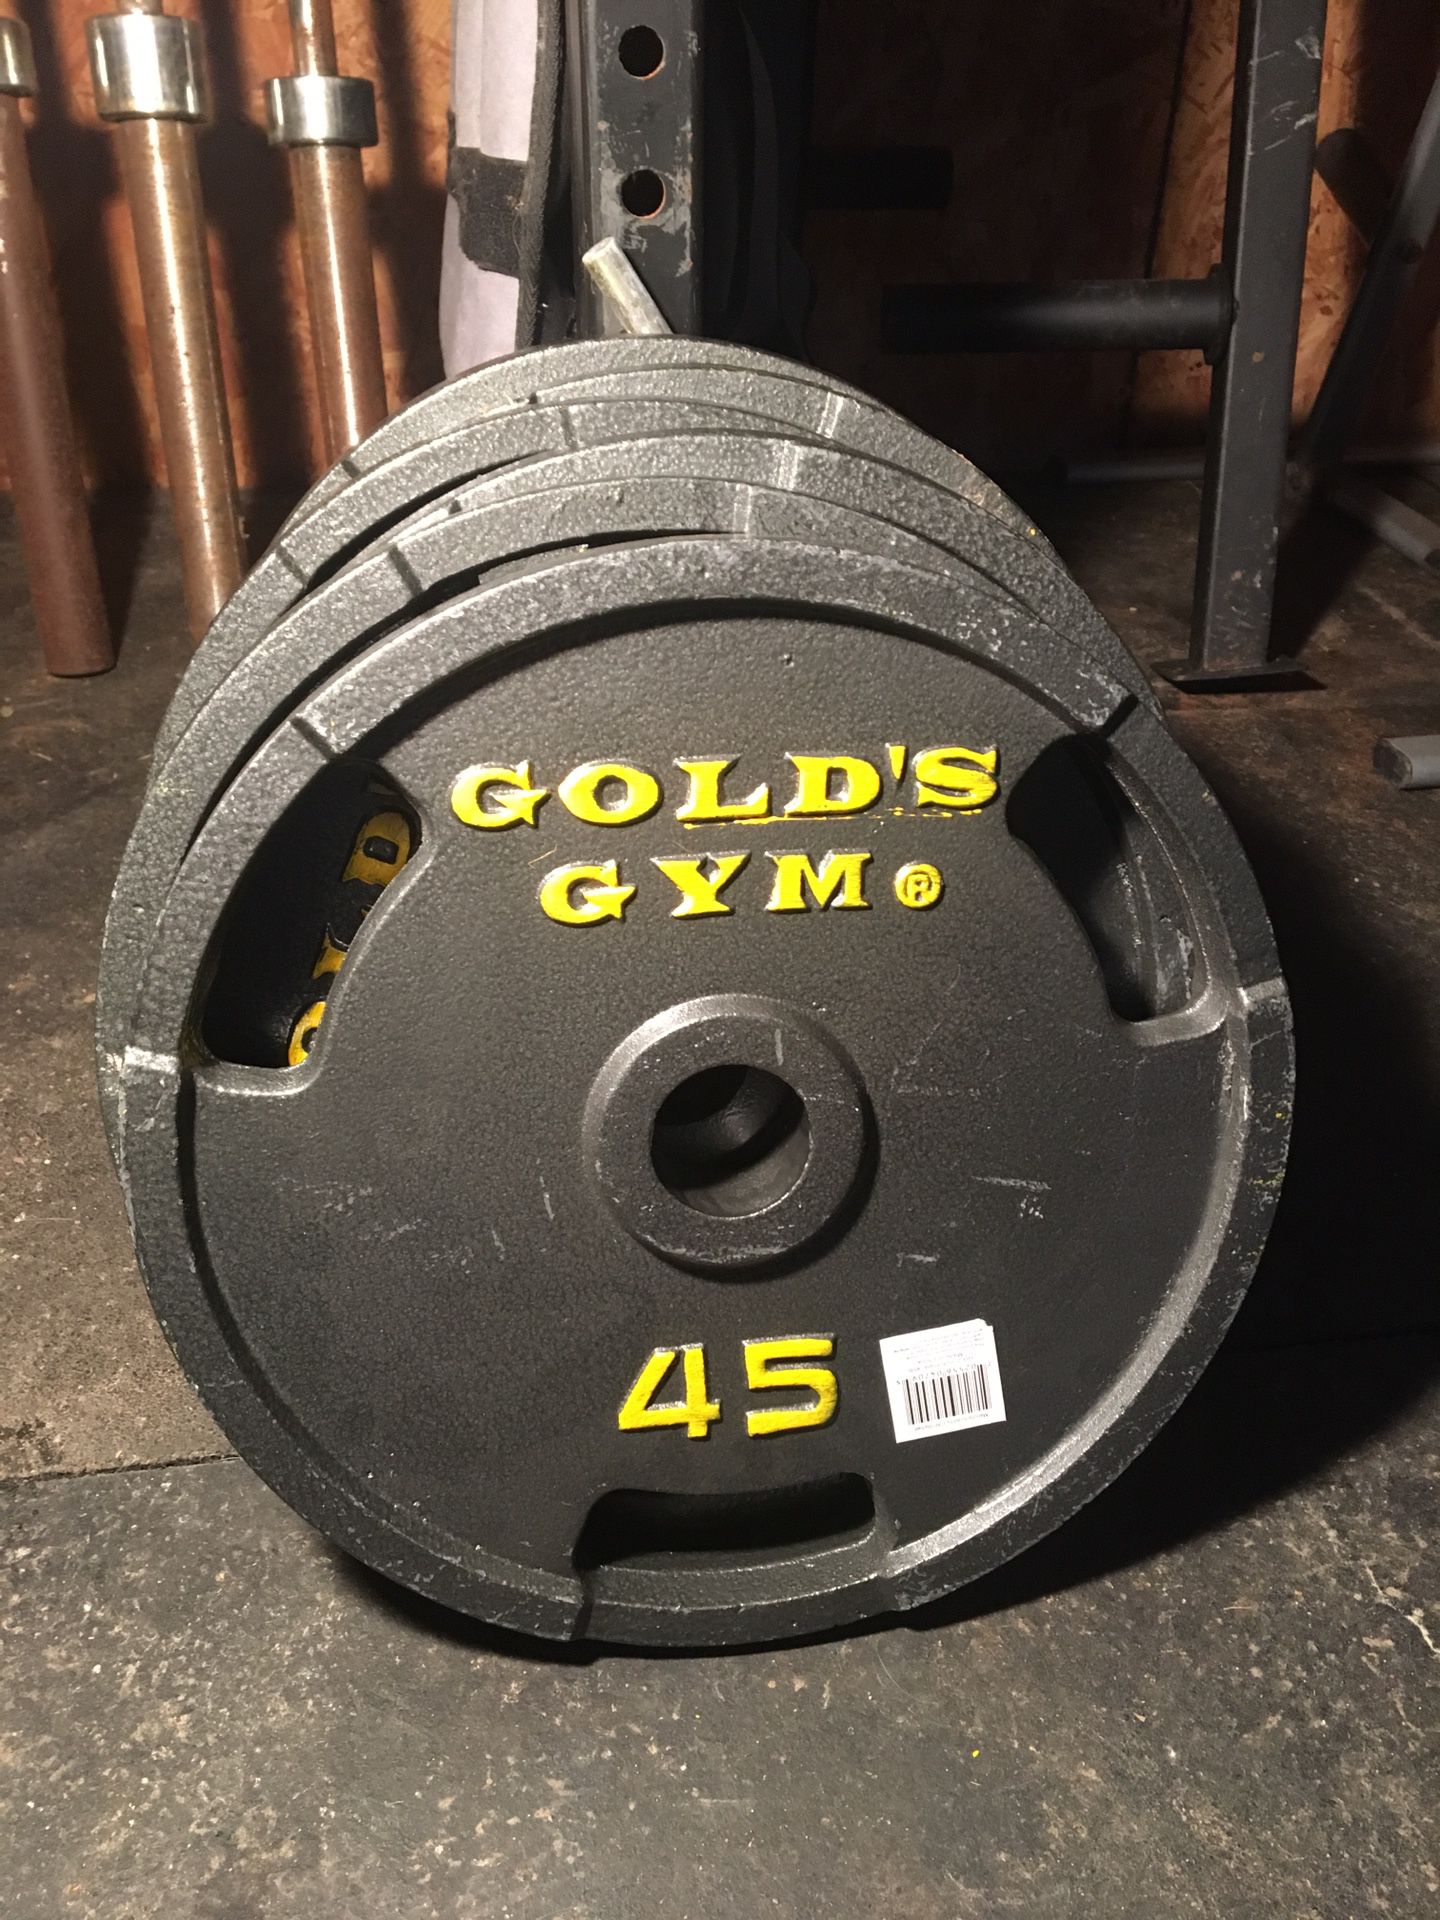 Brand new Golds Gym 45lb Olympic plates